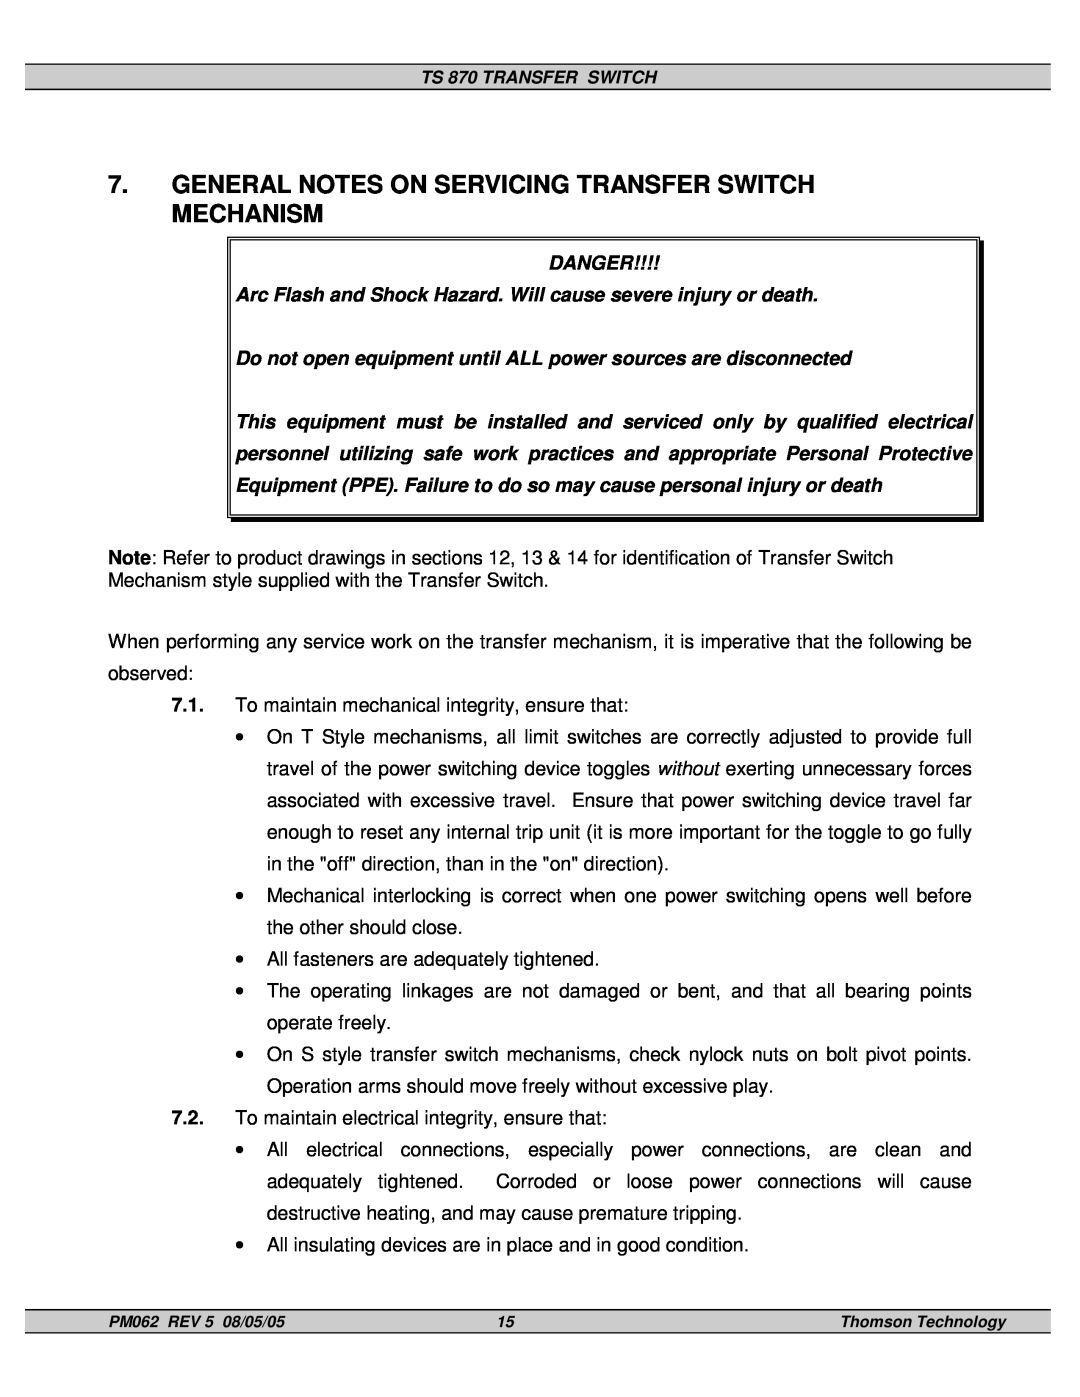 Technicolor - Thomson TS 870 service manual General Notes On Servicing Transfer Switch Mechanism 